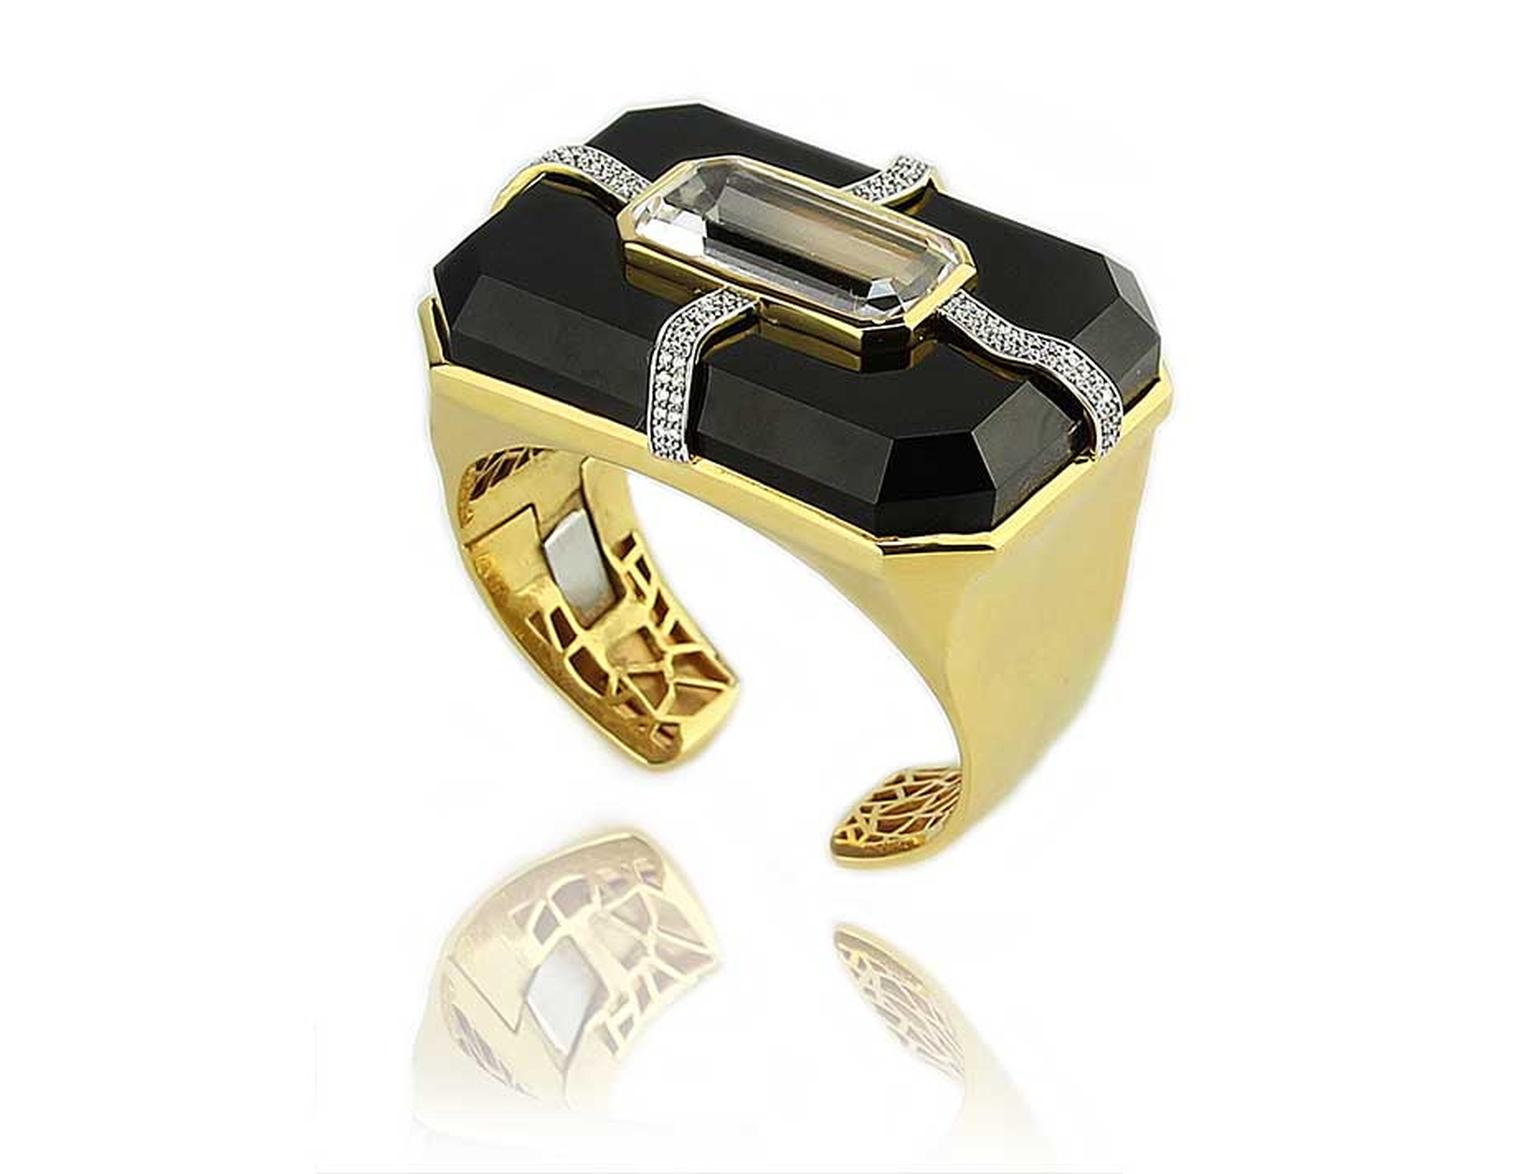 Kara Ross Large Cava Cuff with Pangea Accent in yellow gold with a black onyx base, rock crystal inset and diamonds